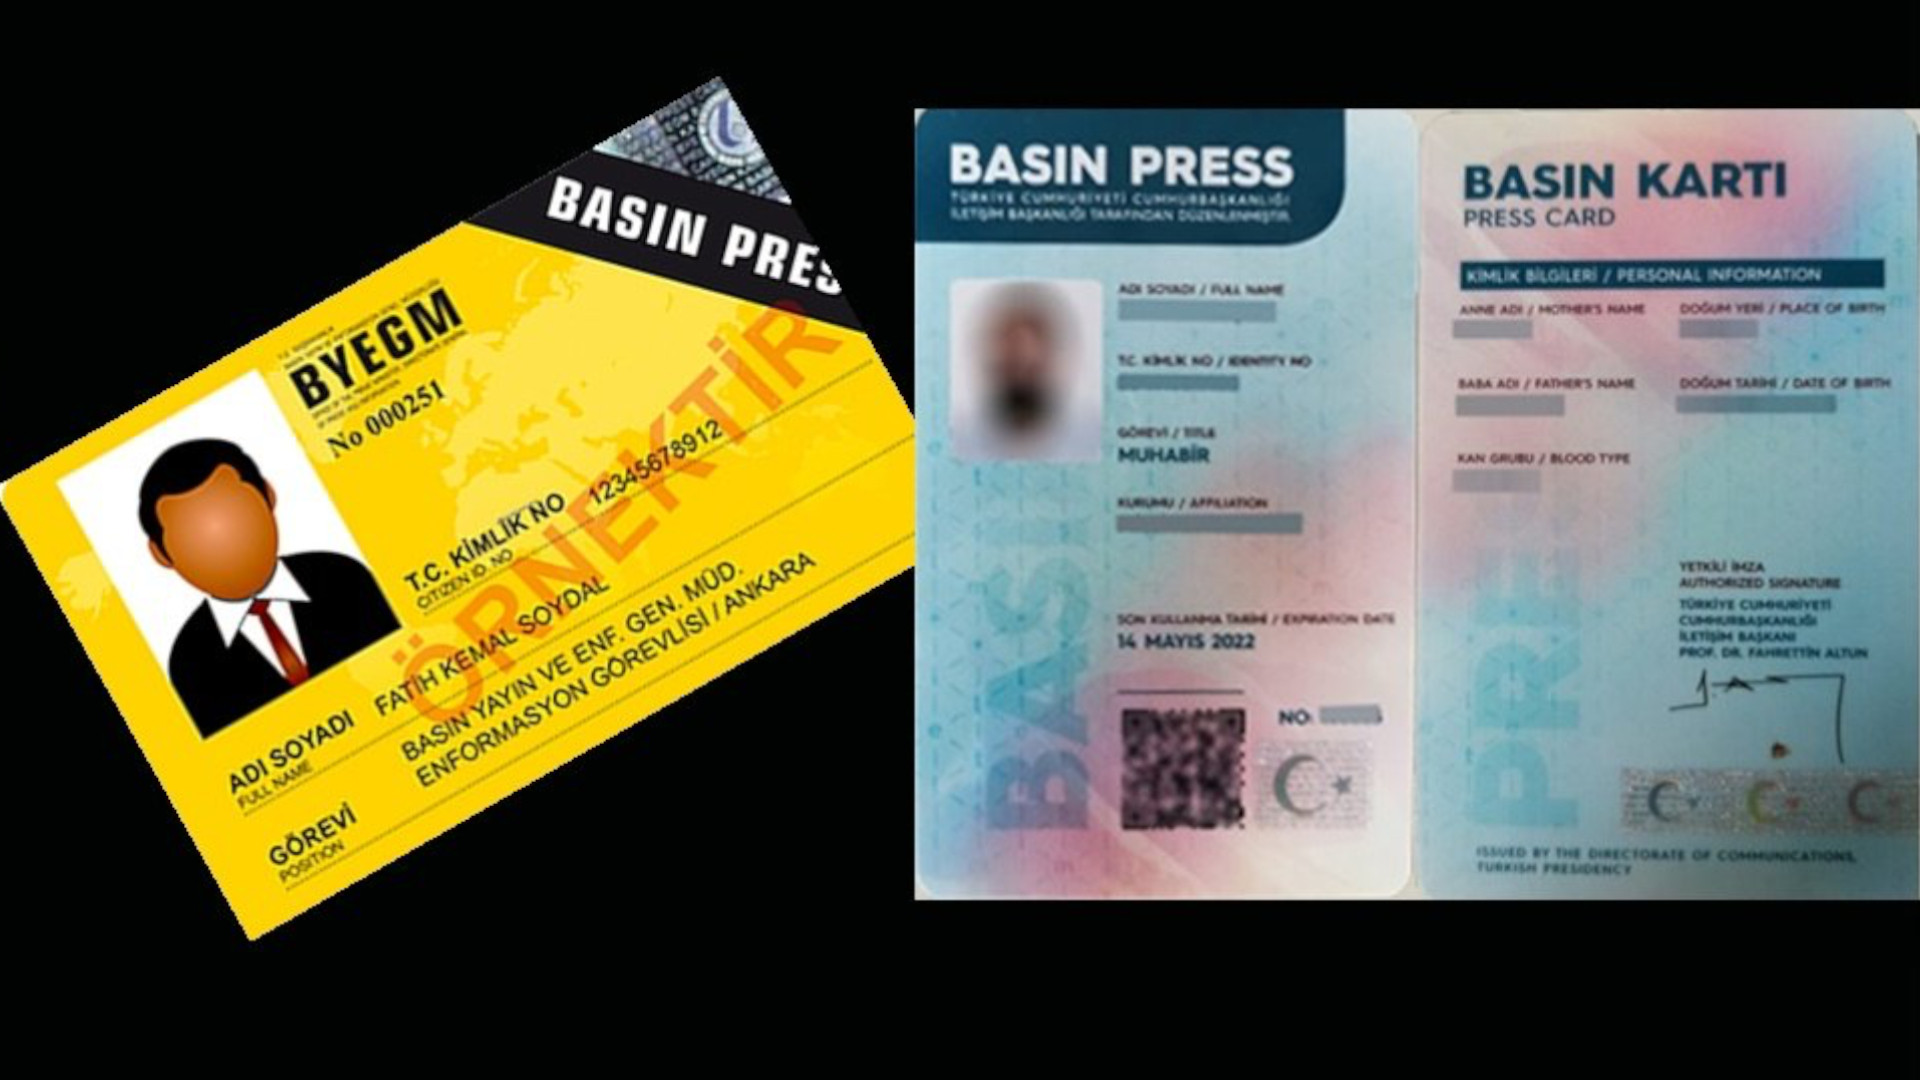 Turkey's Council of State rules against 2018 press card regulation